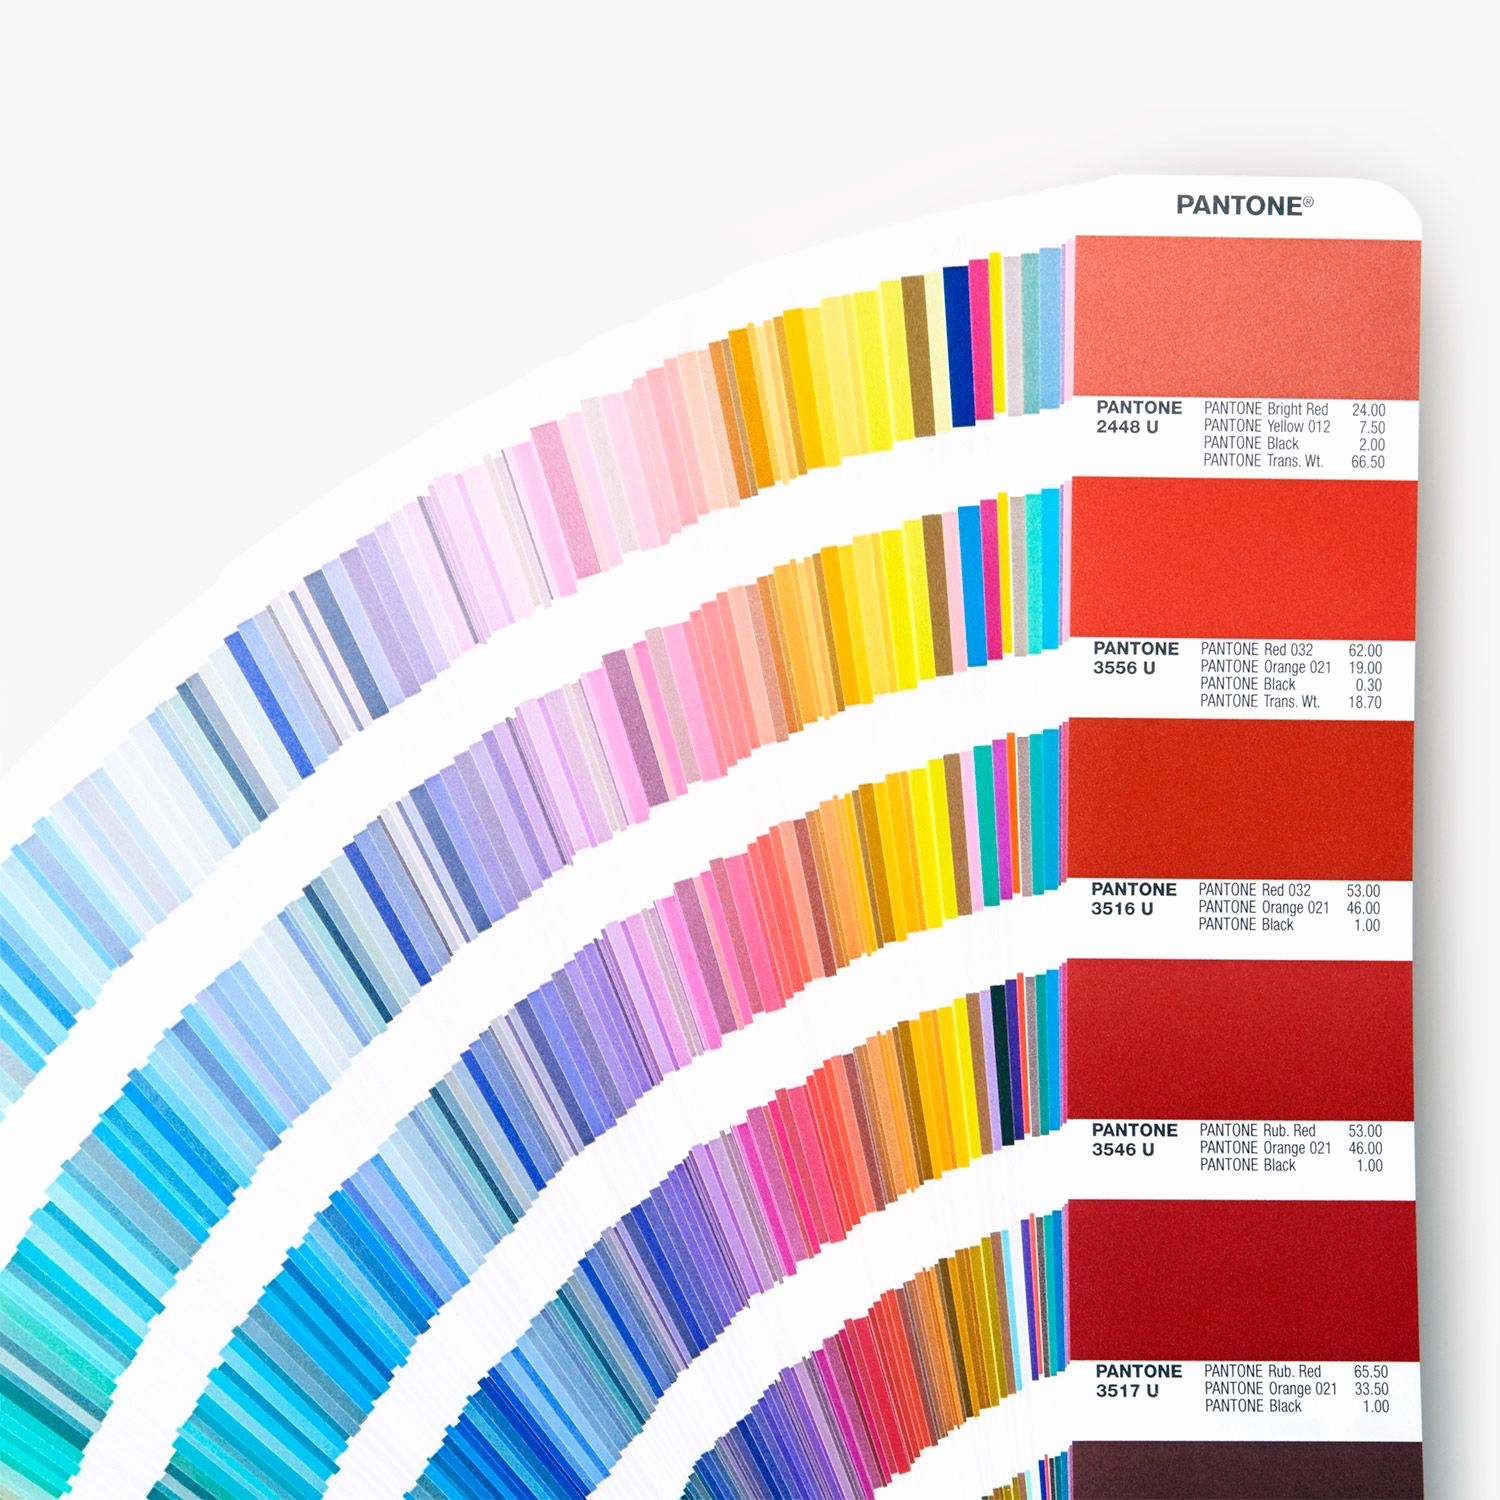 Pantone Color Manager Download